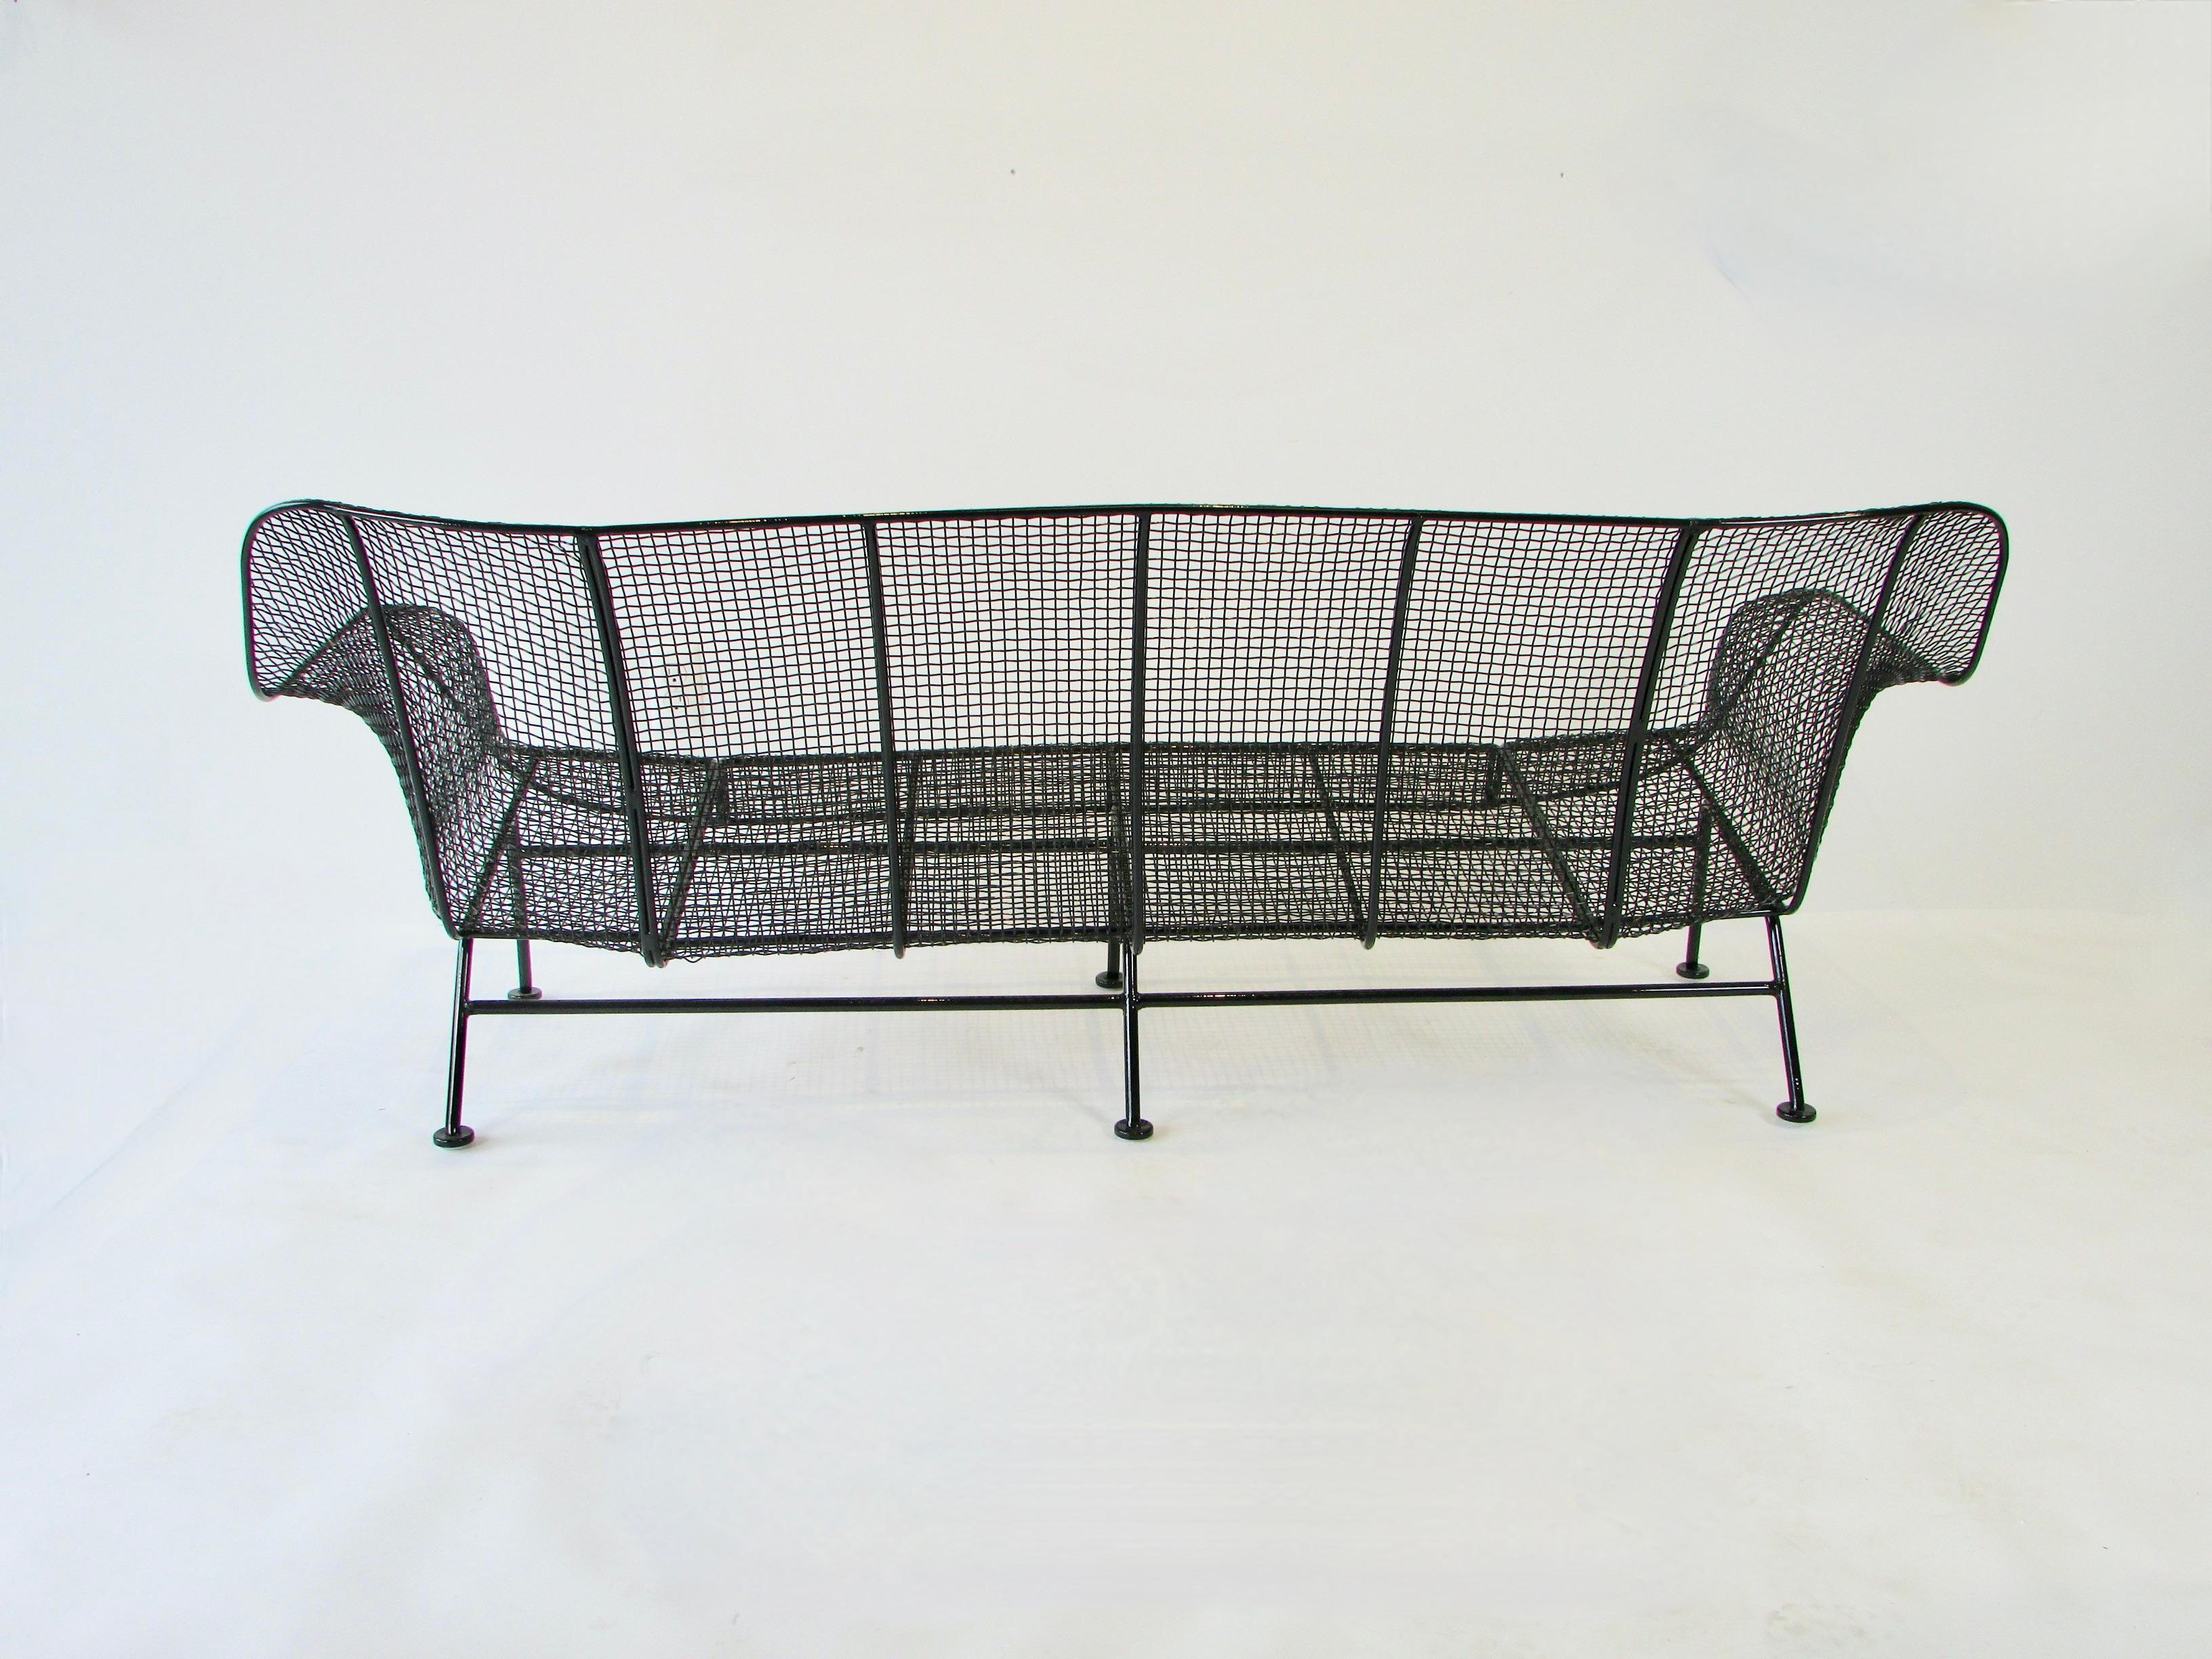 American Completely Restored Woodard Full Size Wrought Iron Couch in Black Powder Coat For Sale